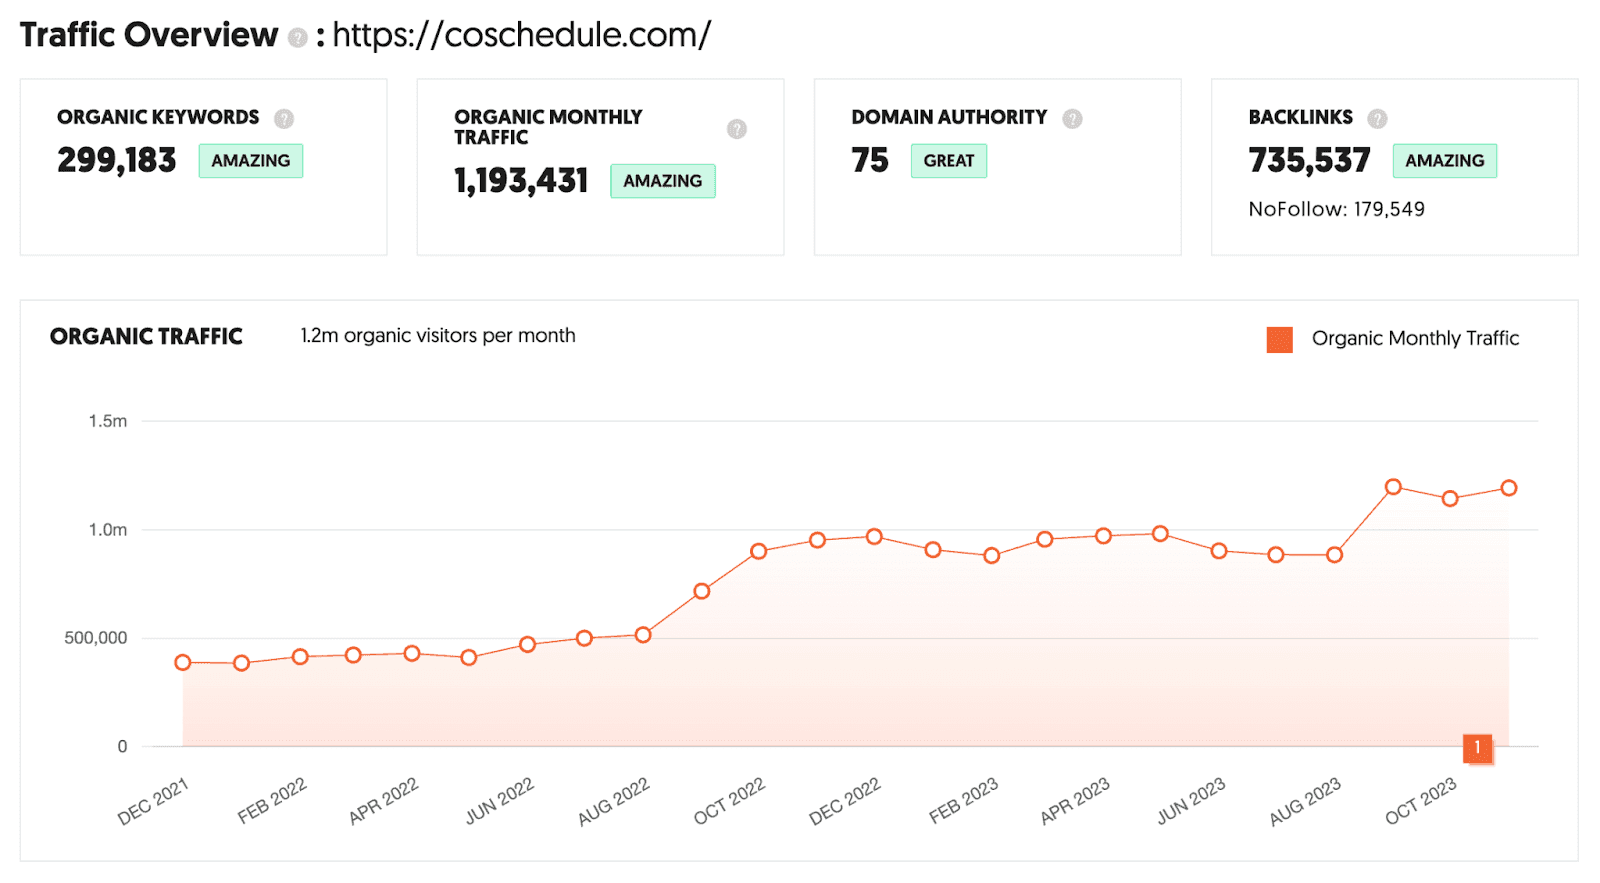 CoSchedule's organic traffic overview chart